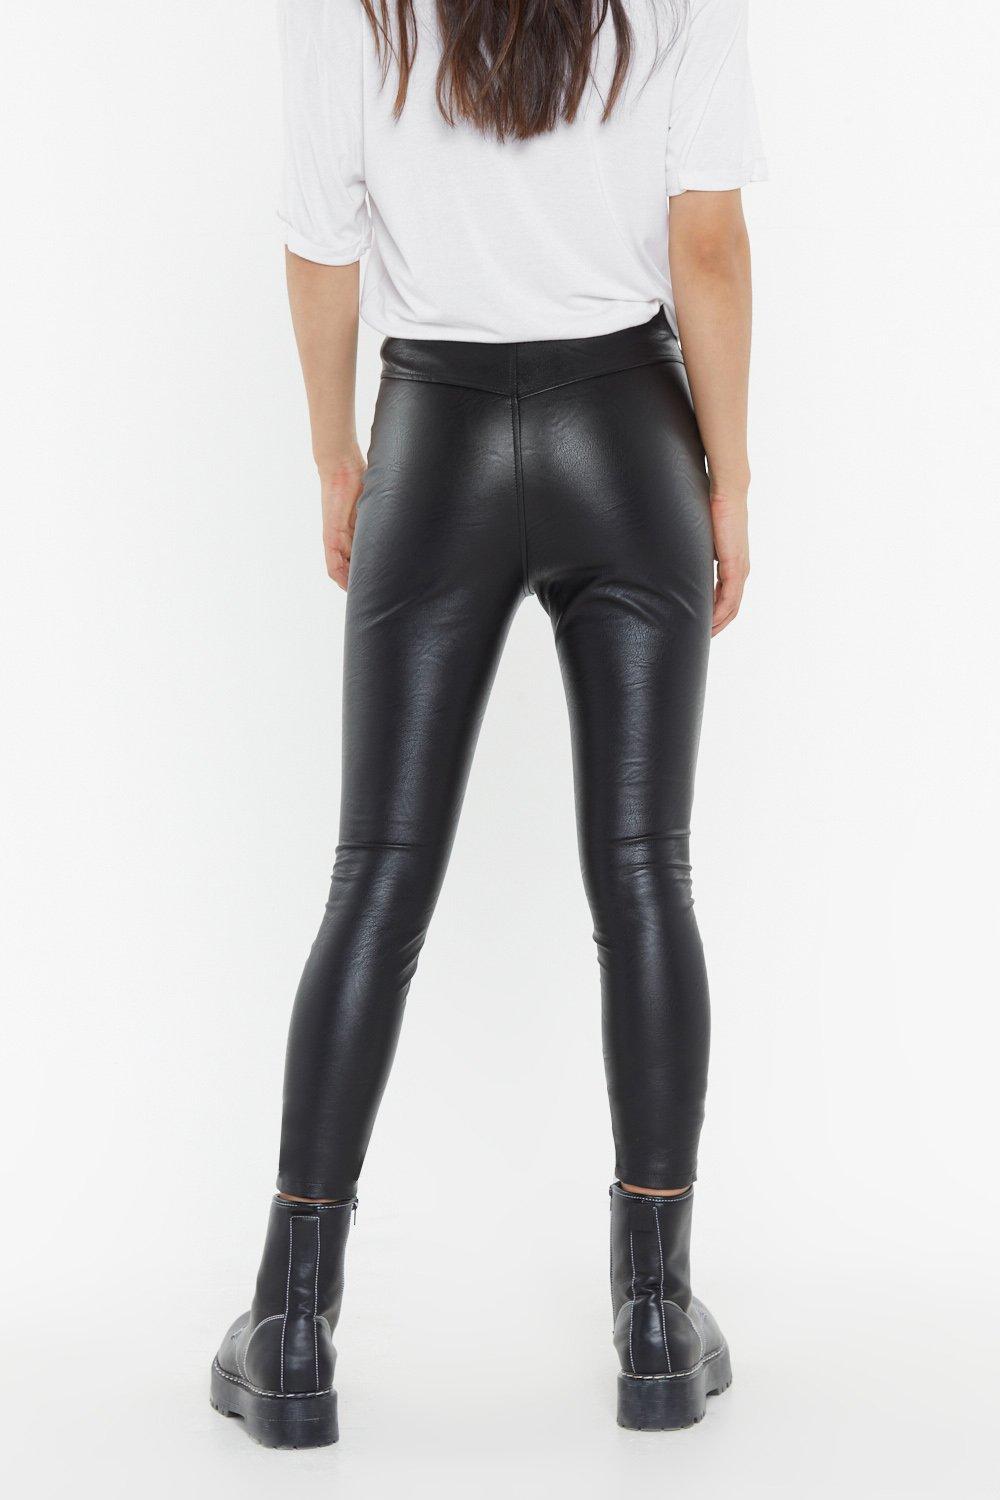 real leather leggings